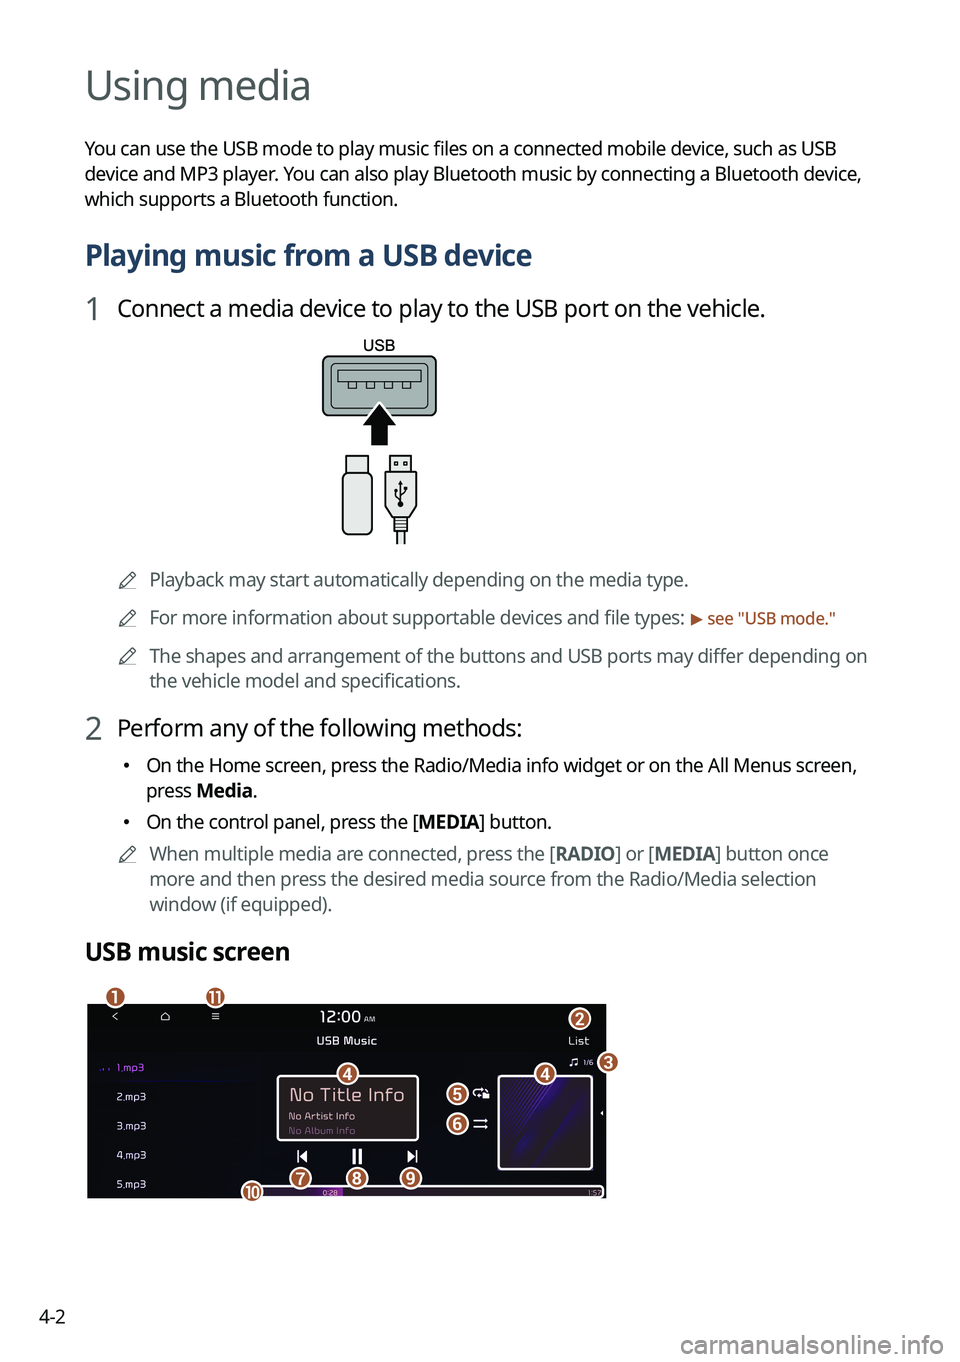 KIA SOUL 2023  Quick Reference Guide 4-2
Using media
You can use the USB mode to play music files on a connected mobile device, such as USB 
device and MP3 player. You can also play Bluetooth music by connecting a Bluetooth device, 
whic